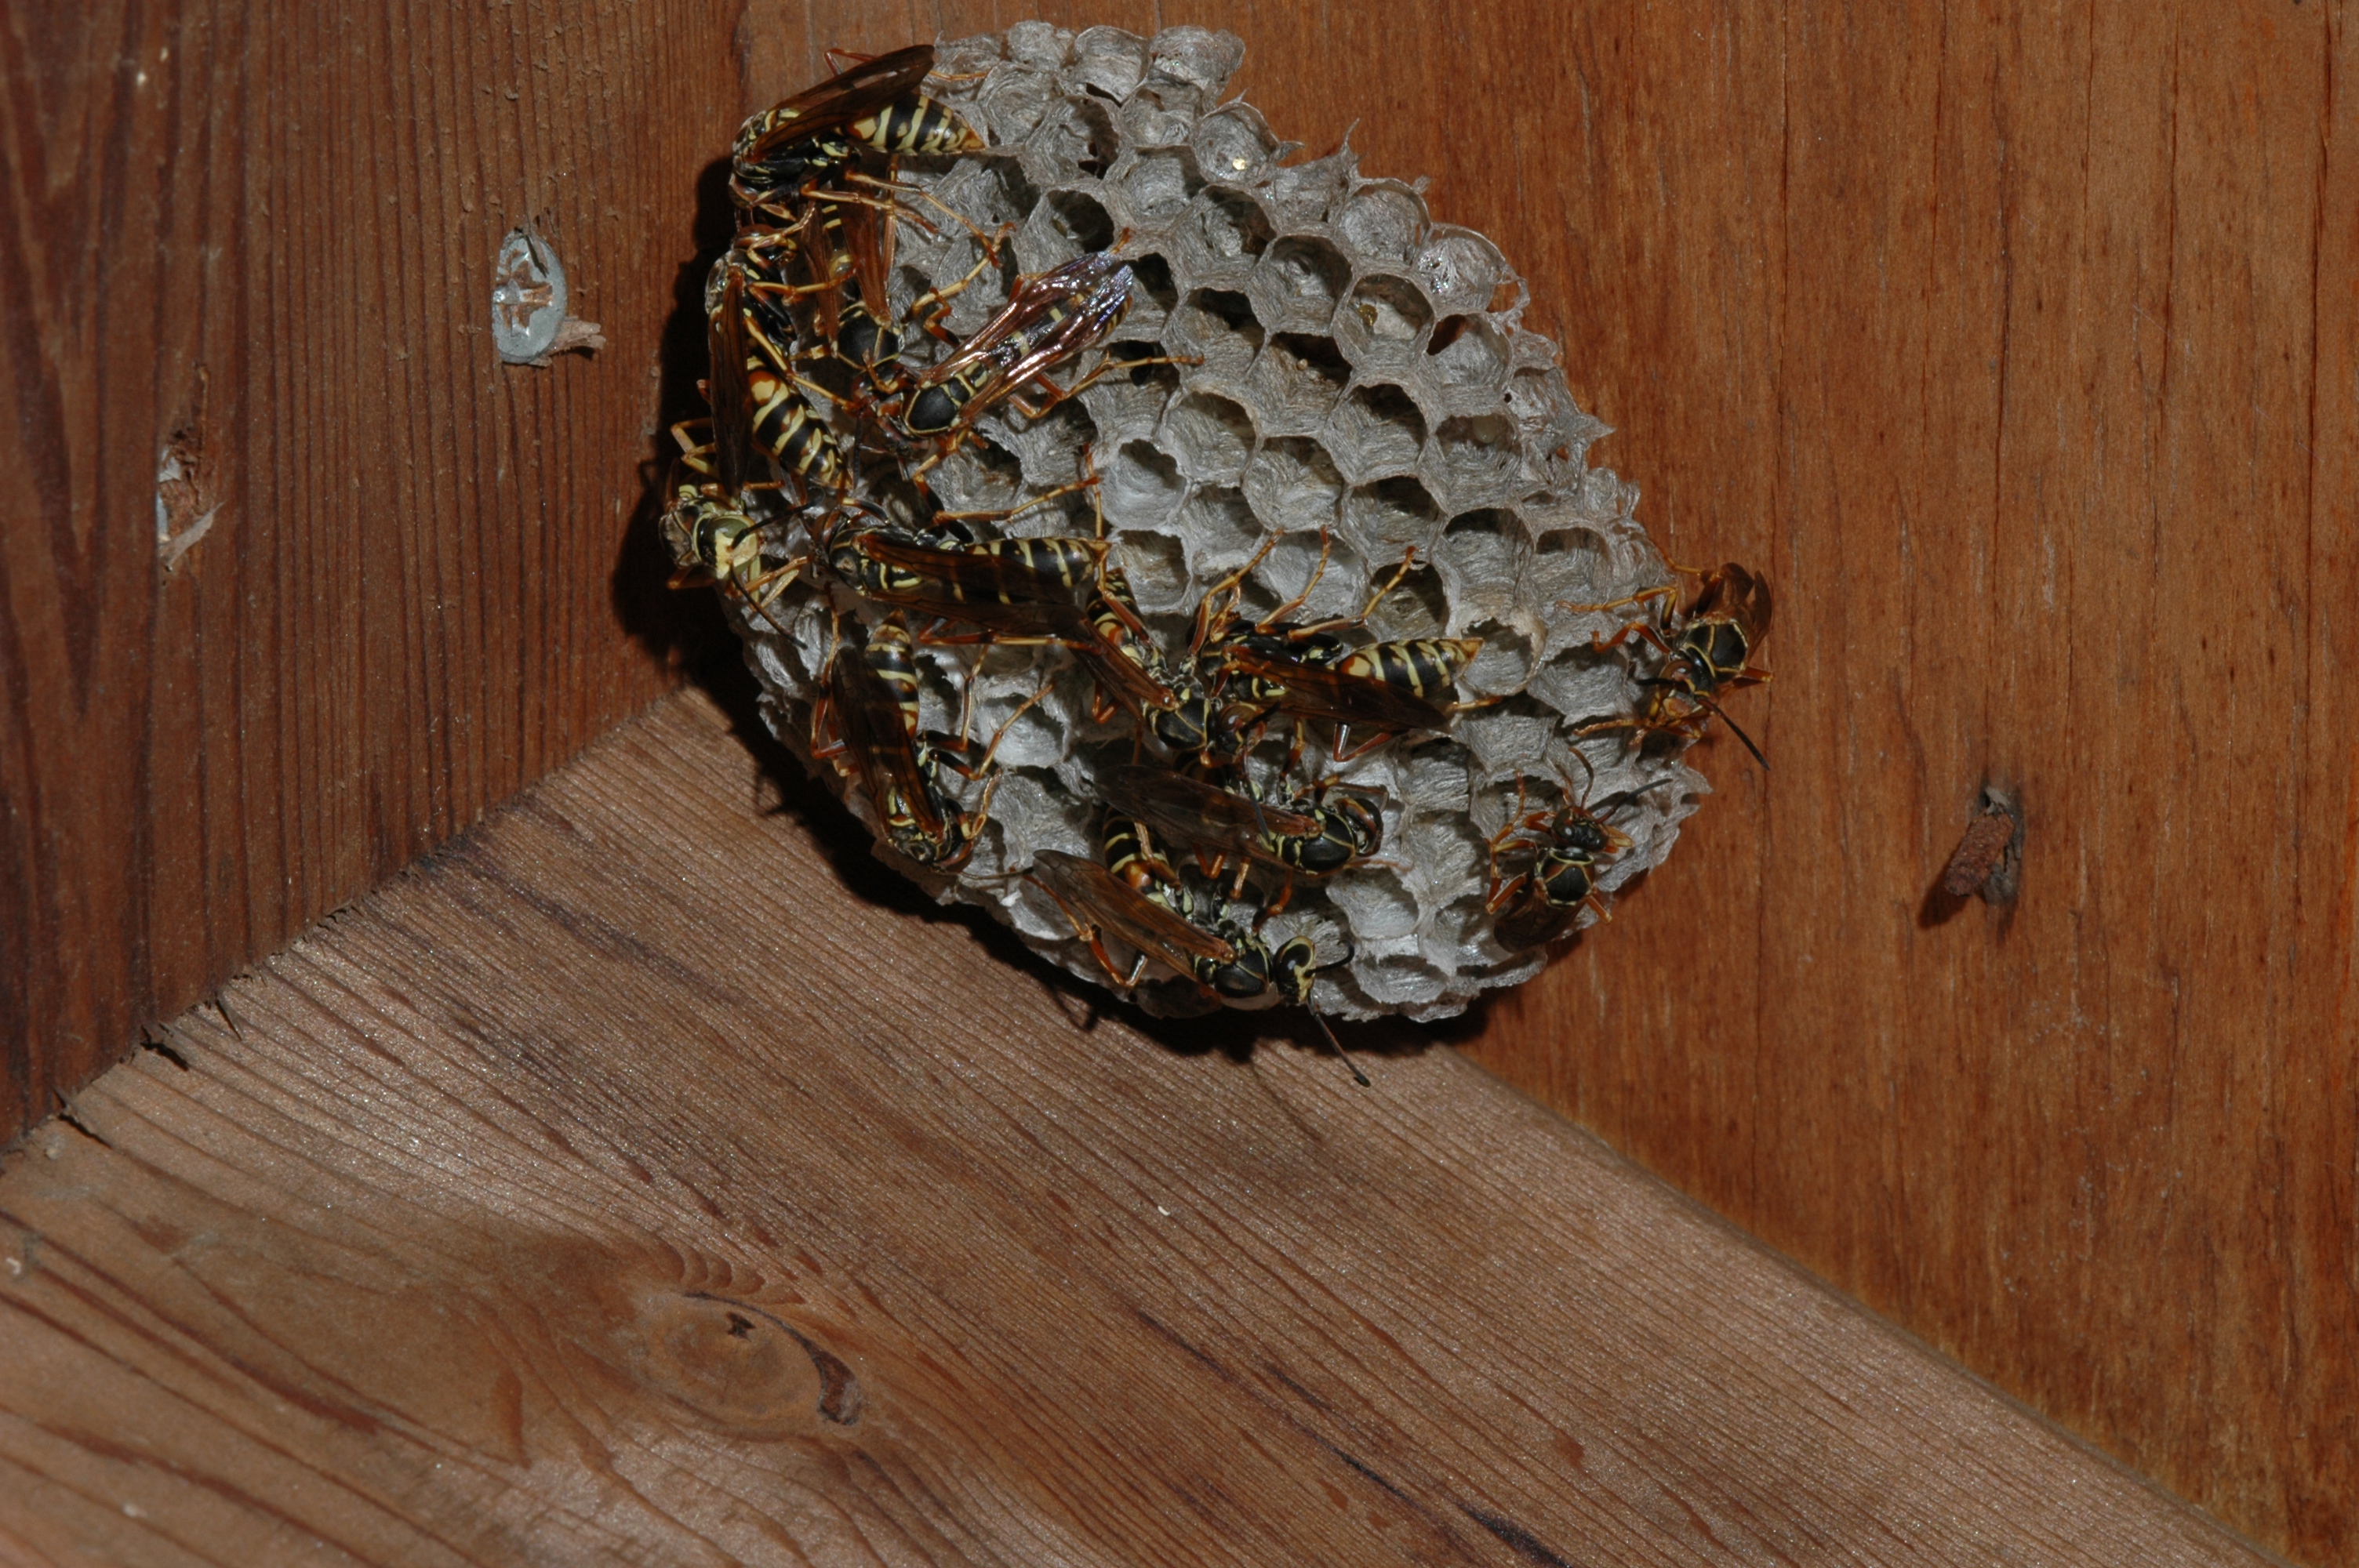 wasp nest wedged in the corner of a wooden box